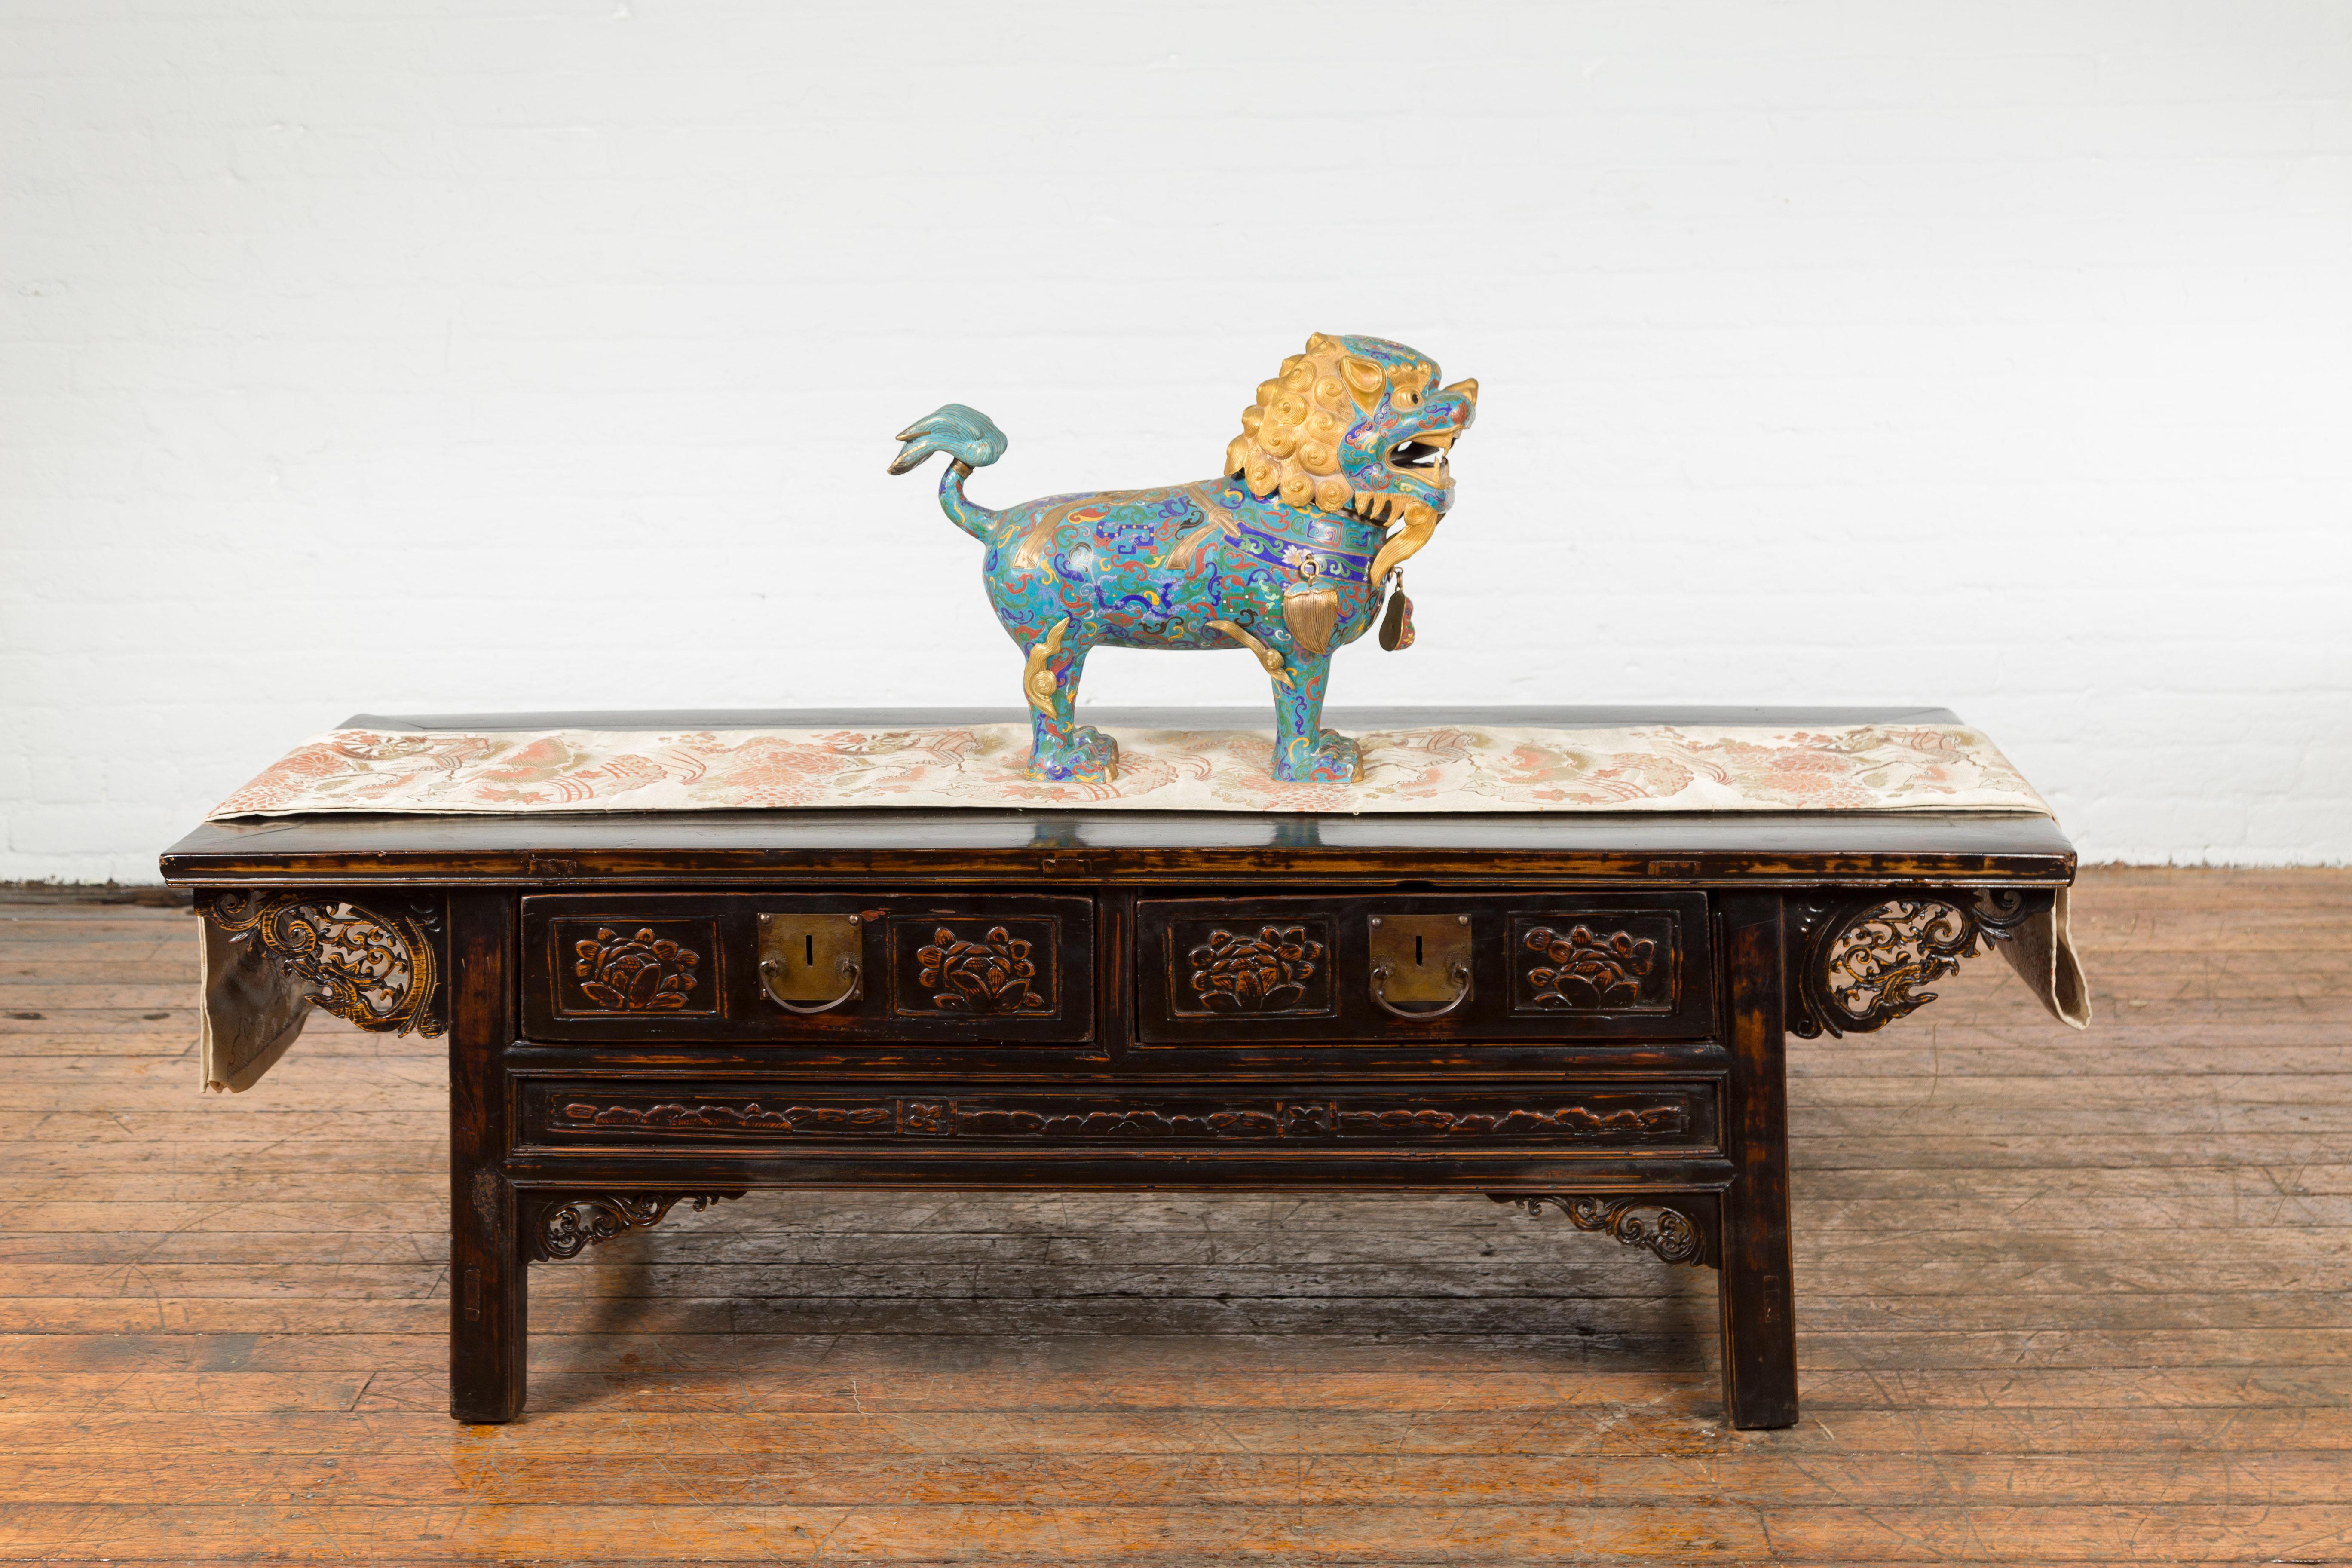 A Chinese vintage metal cloisonné Foo Dog guardian lion sculpture from the mid 20th century. We have a pair available, see item LU863924346552. Photographed together on image 4. Created in China during the midcentury period, this metal cloisonné